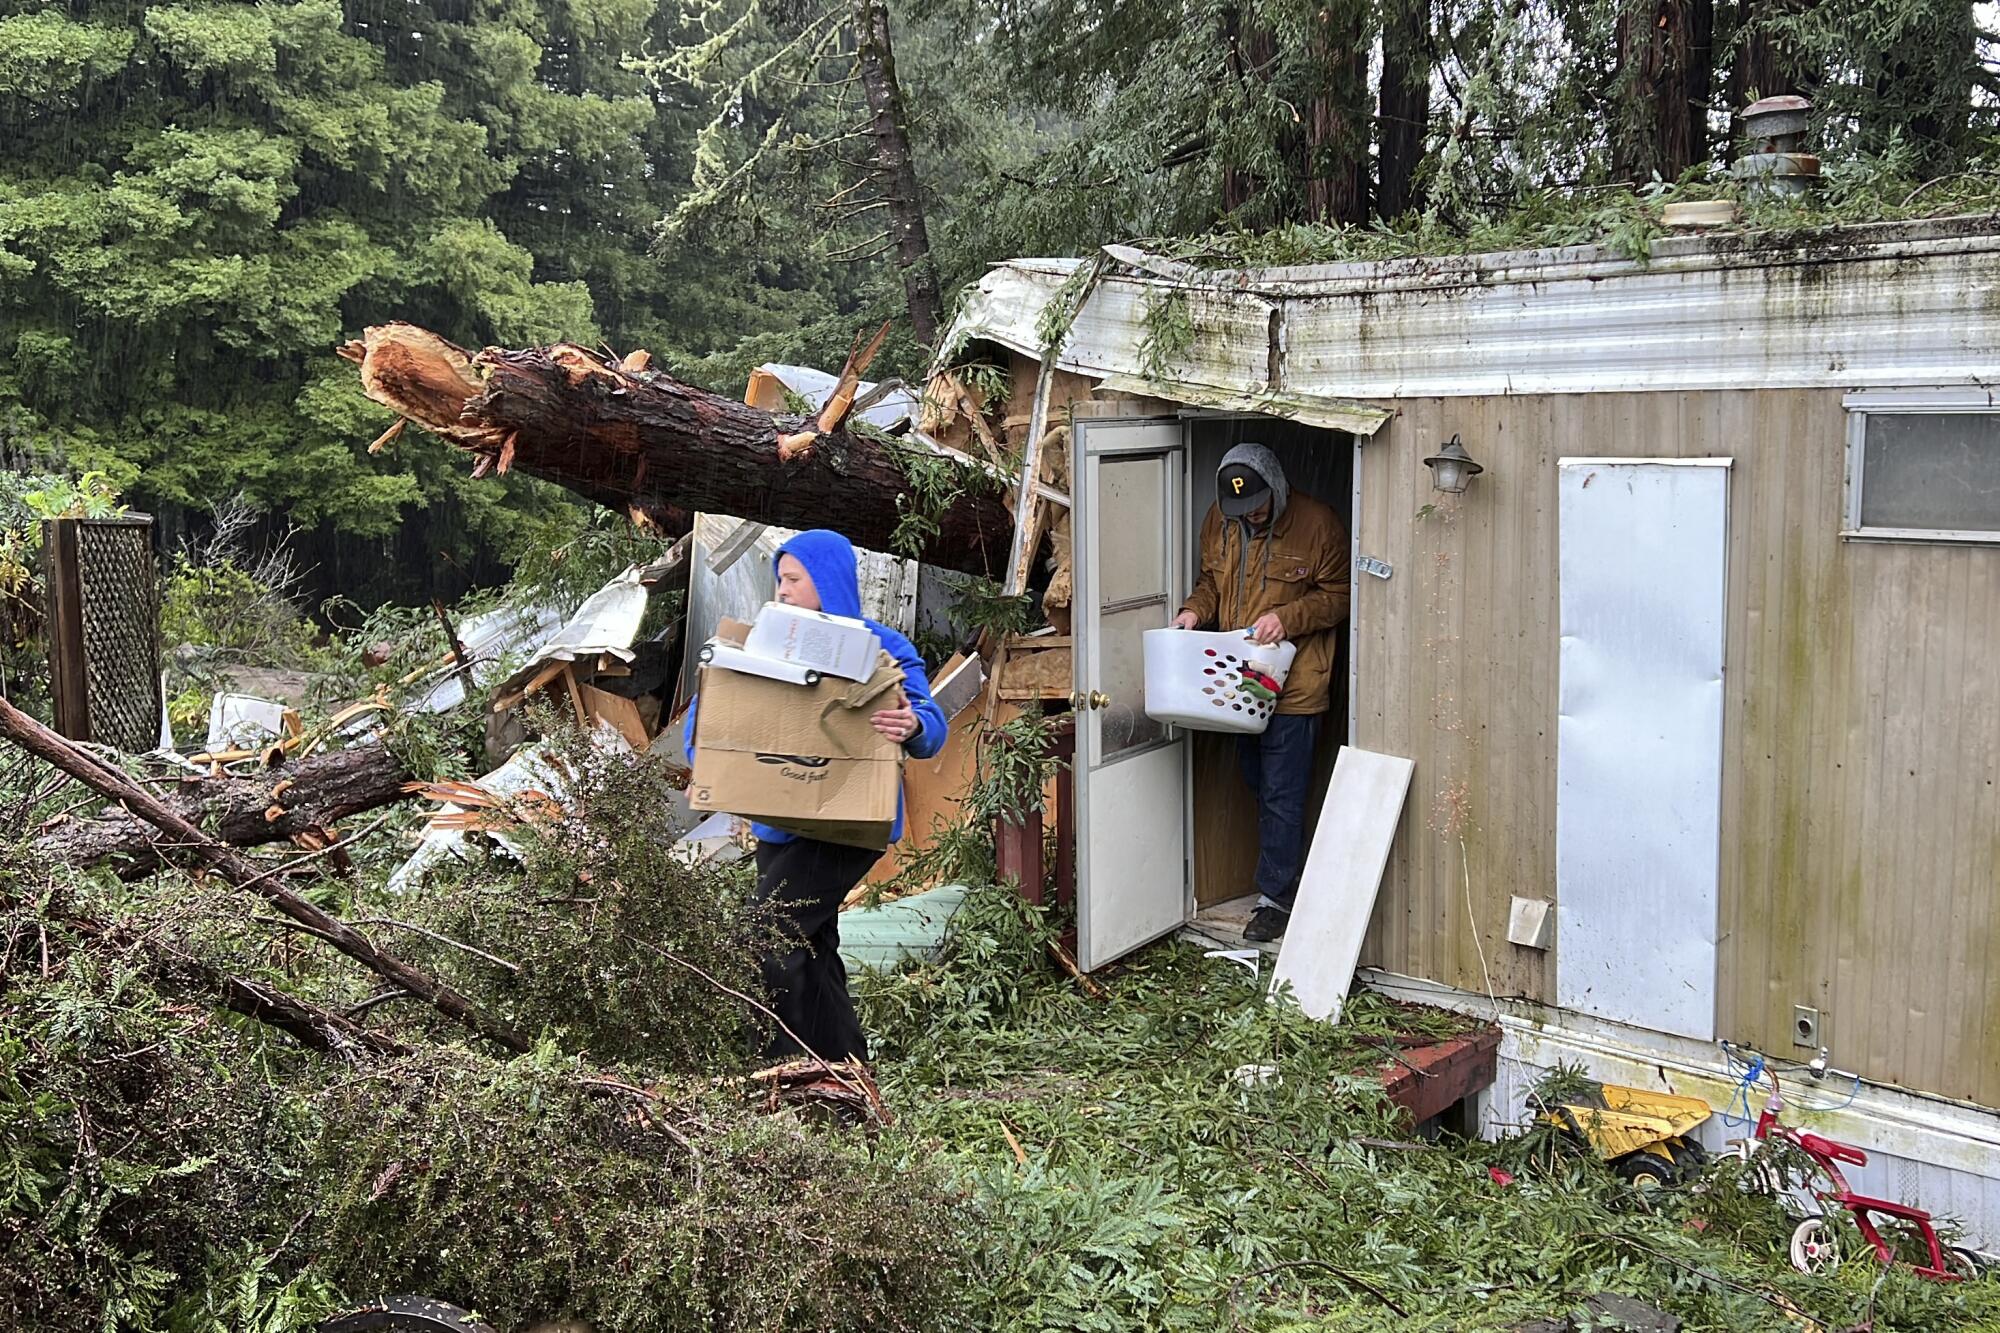 Two people walk out of a trailer surrounded by debris and tall, thick pine-tree forest.